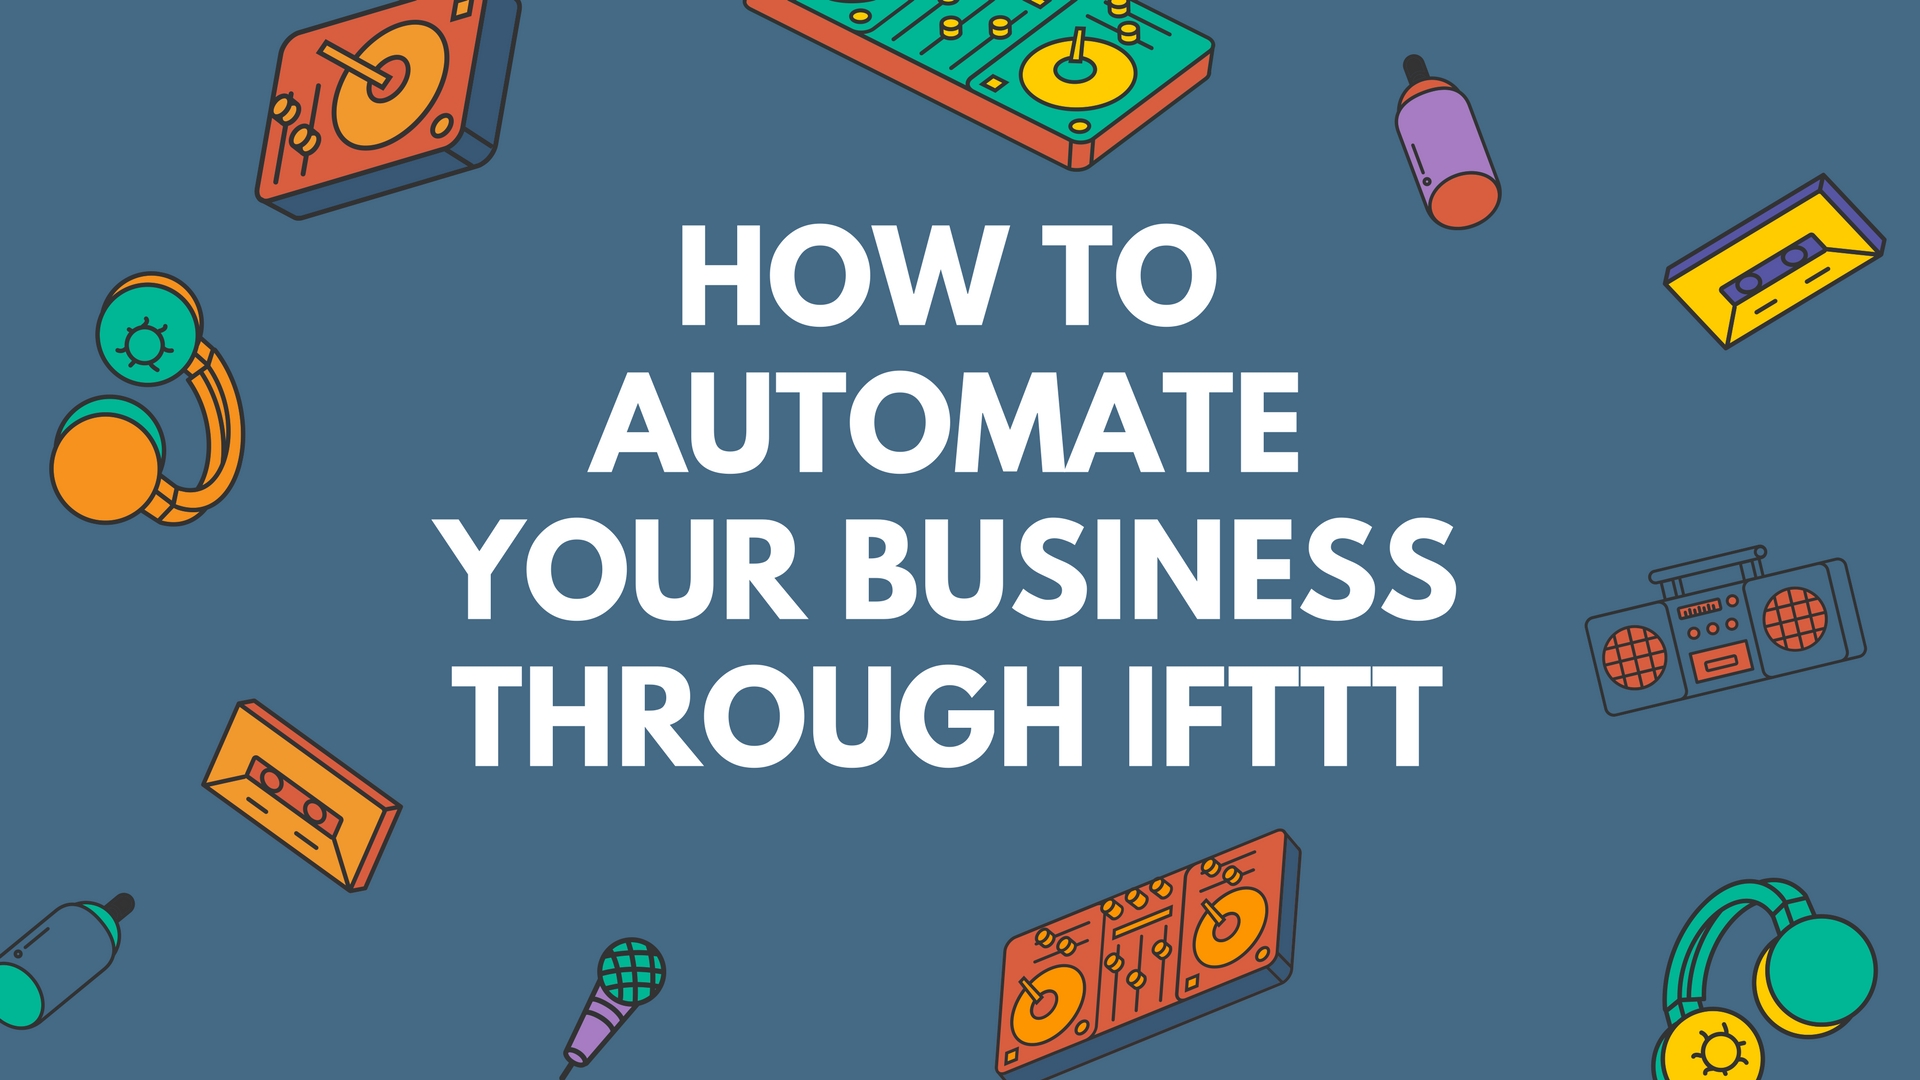 How to Automate Your Business Through IFTTT